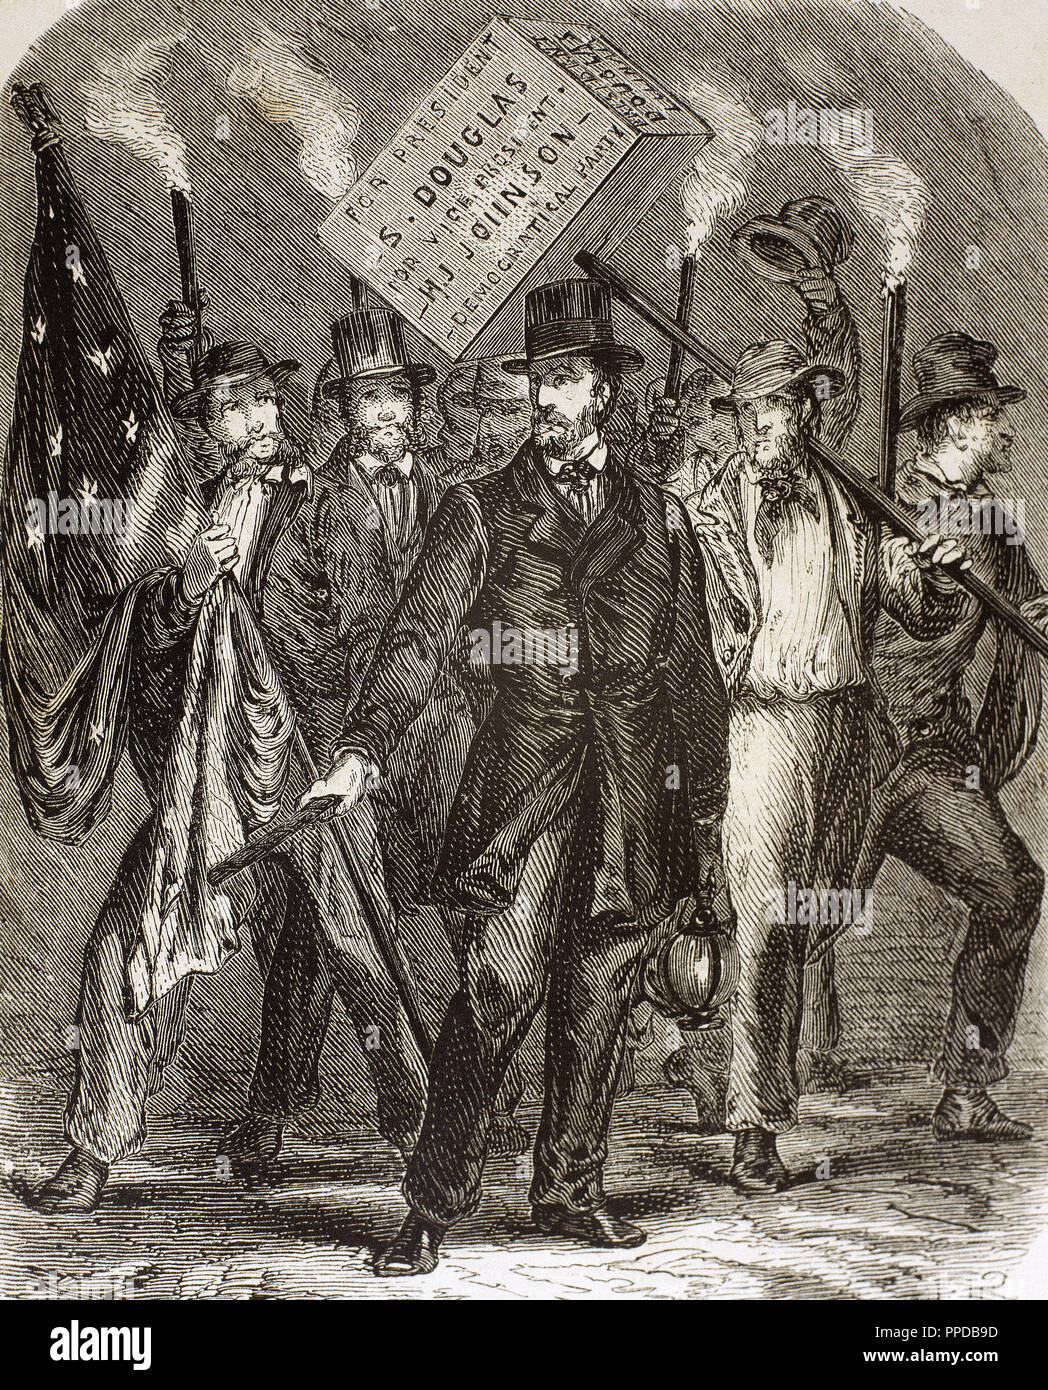 United States. Supporters of Stephen Douglas, candidate of the Democratic Party. Engraving from 'L'Illustration Journal Universel, 1860. Stock Photo